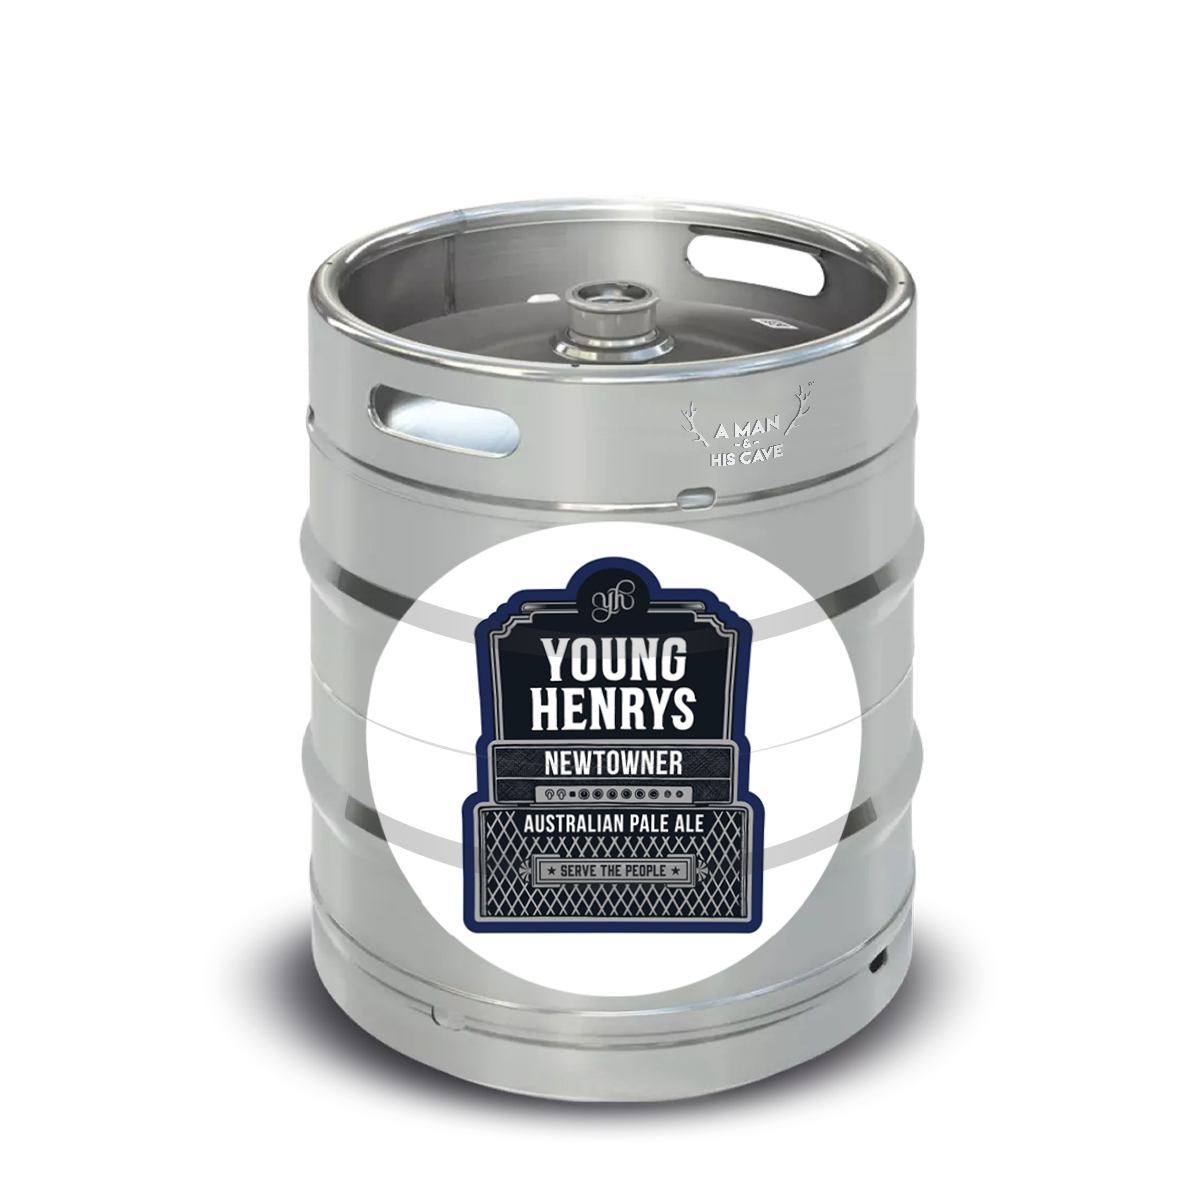 Beer Keg - Young Henrys Newtowner 50lt Commercial Keg 4.8% A-Type Coupler [NSW]